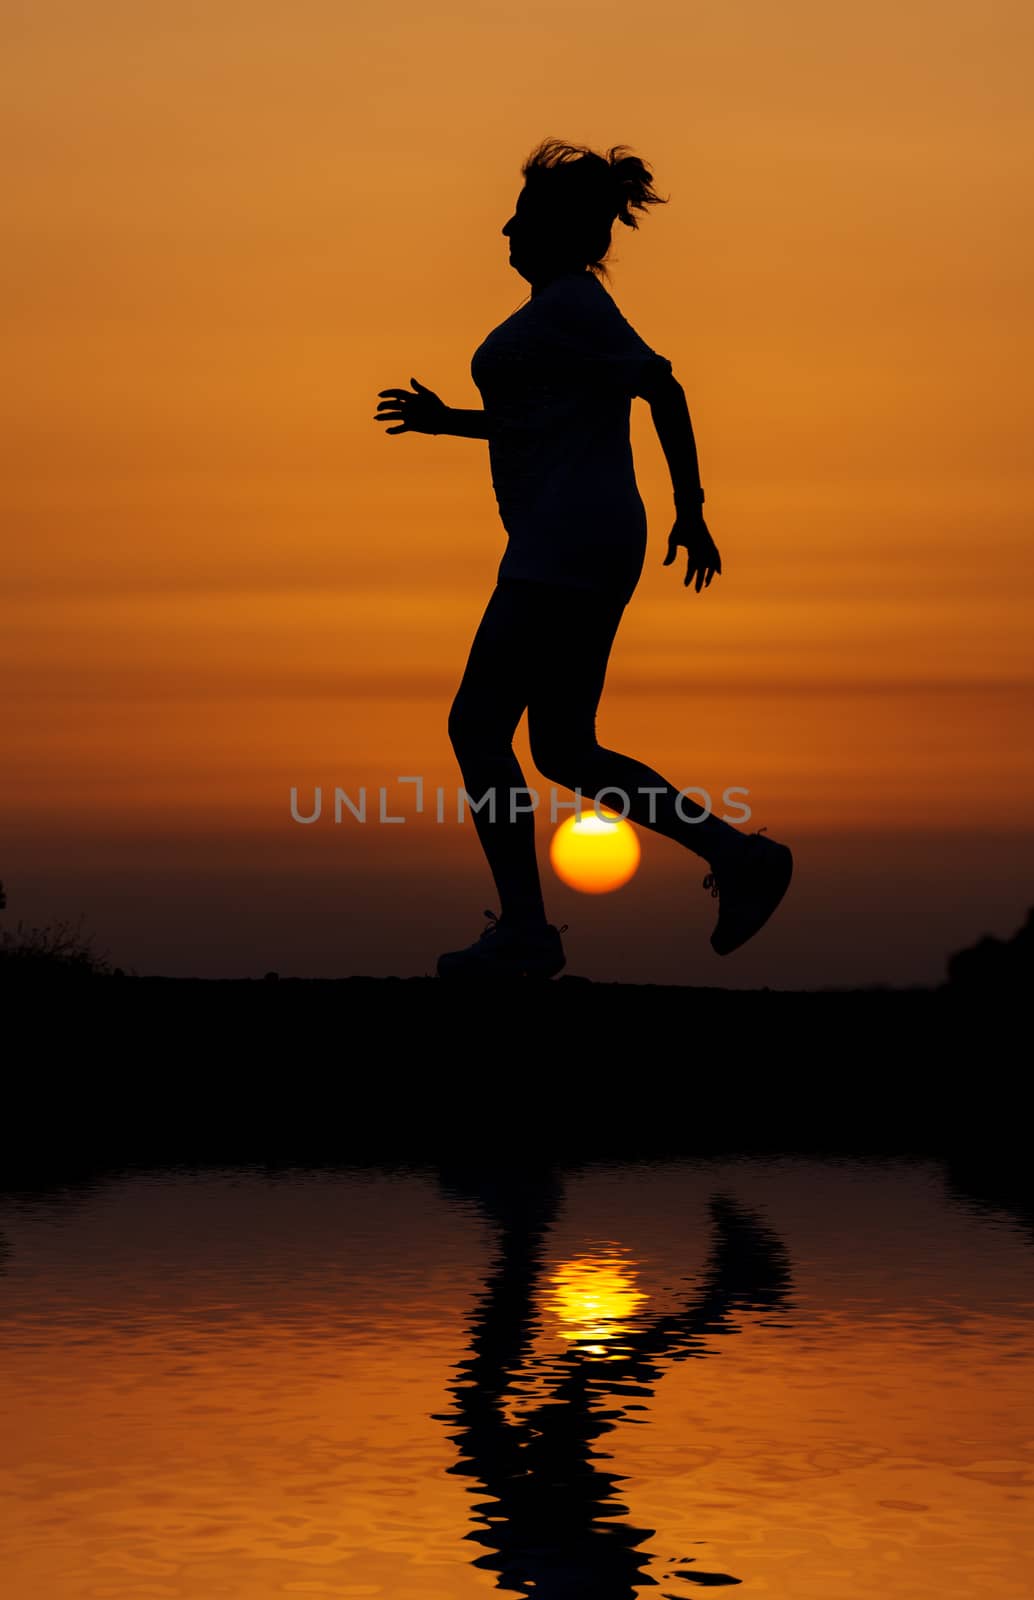 Silhouette woman running against orange sunset with reflection in water